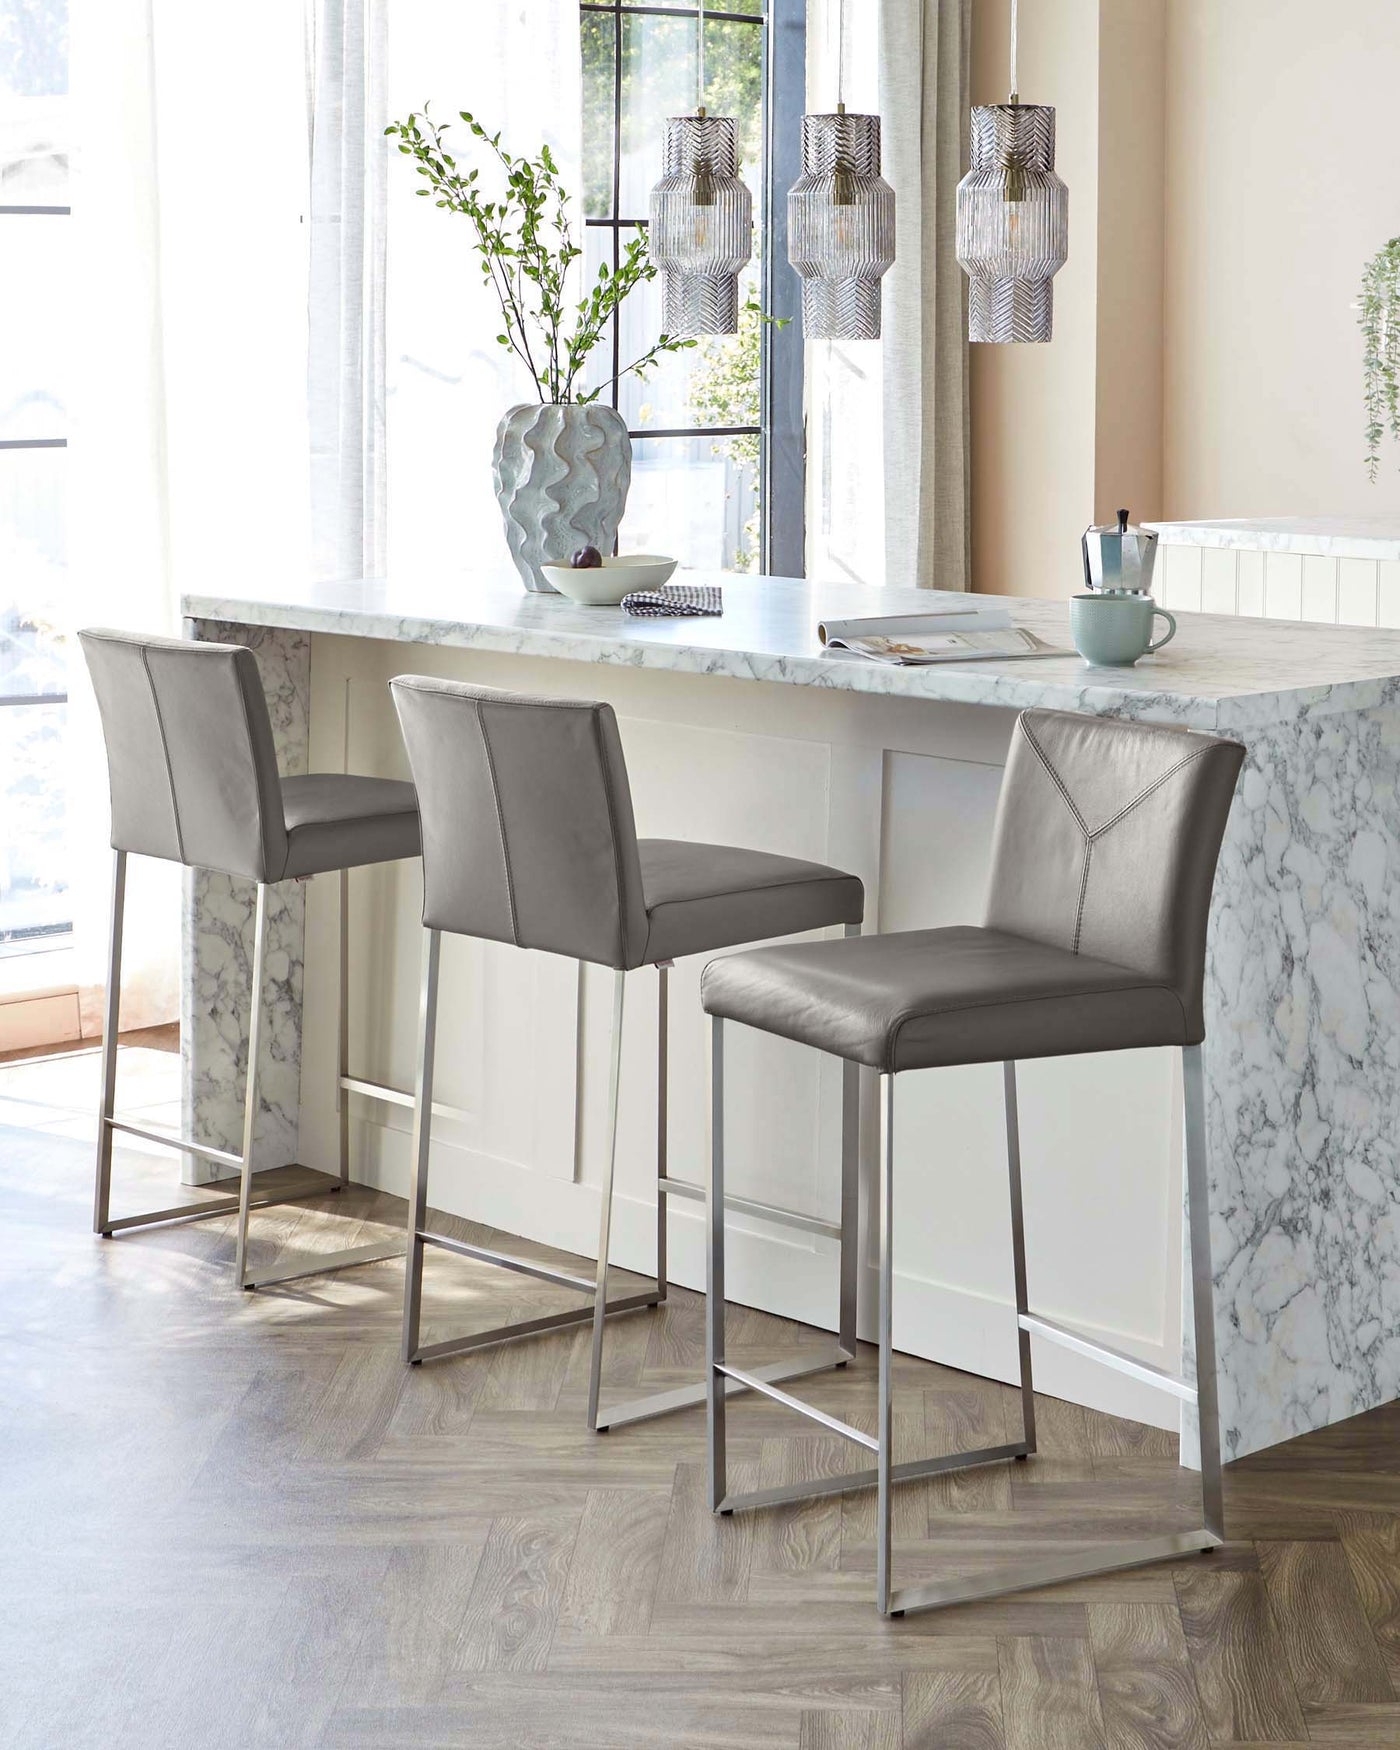 Two contemporary upholstered bar stools with sleek, silver-finished metal legs positioned at a high marble countertop. The stools feature a mid-back design with clean lines and are upholstered in a light grey fabric, complementing the bright, modern kitchen setting.